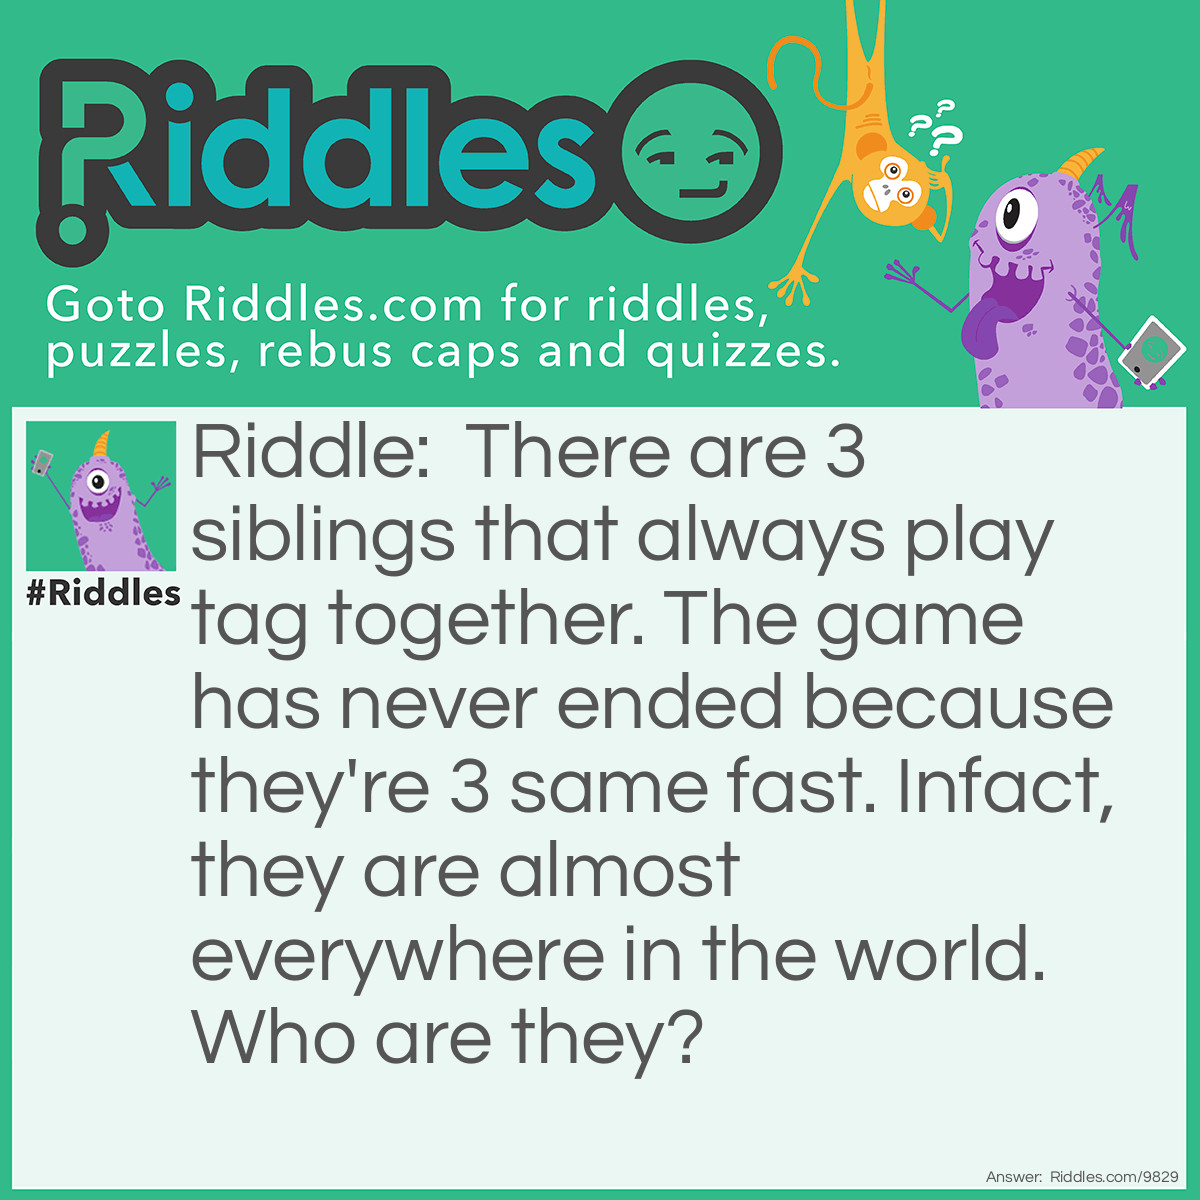 Riddle: There are 3 siblings that always play tag together. The game has never ended because they're 3 same fast. Infact, they are almost everywhere in the world. Who are they? Answer: Electric Fan.